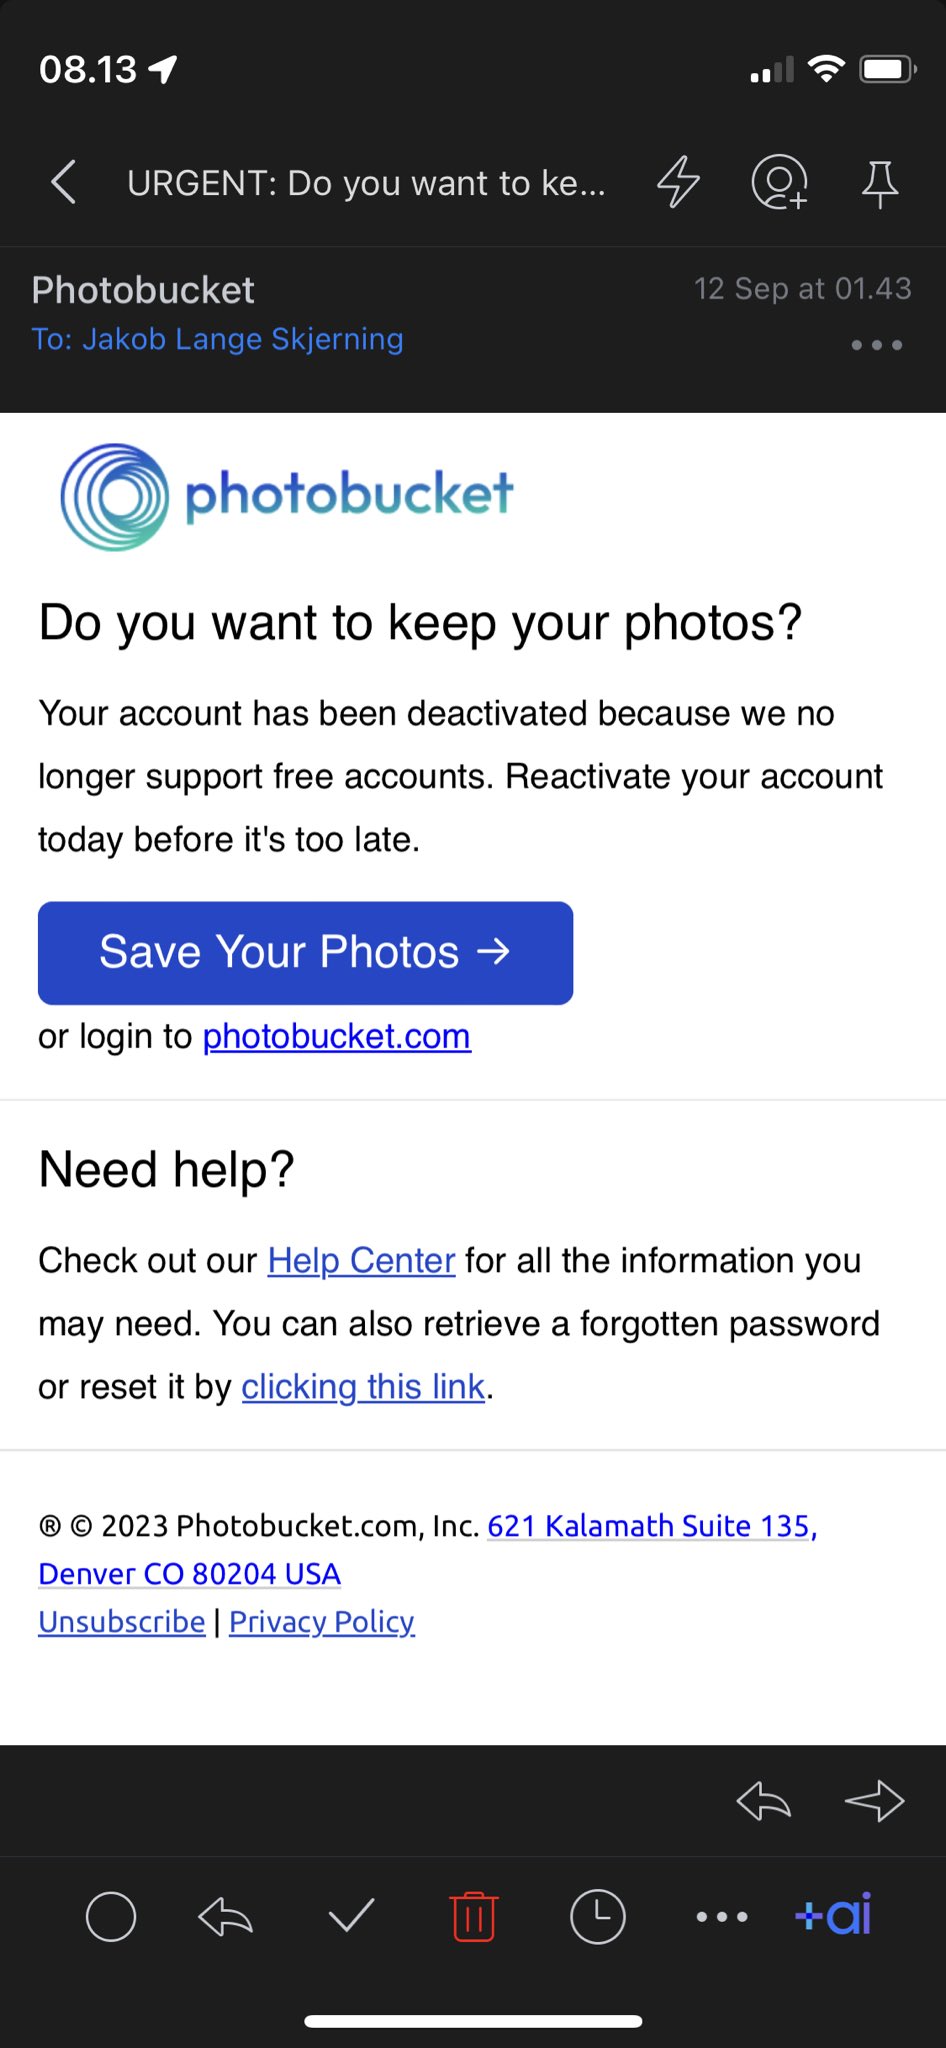 Account Removal Emails: Screenshot of Photobucket's account deactivation notification email